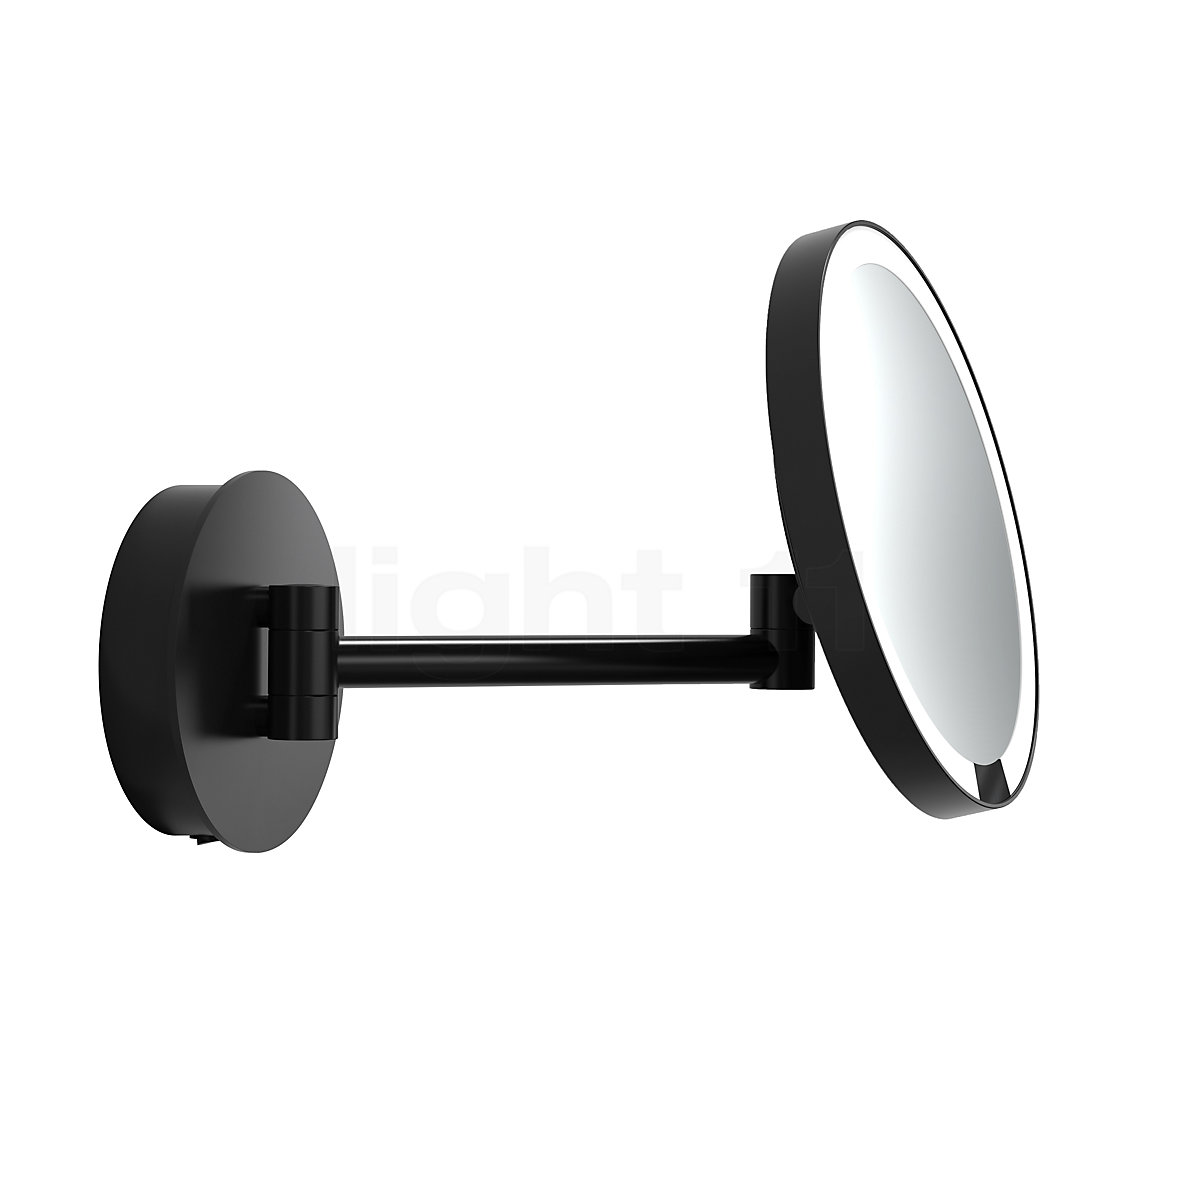 Decor Walther Just Look Wall, Wall Mounted Lighted Makeup Mirror Black